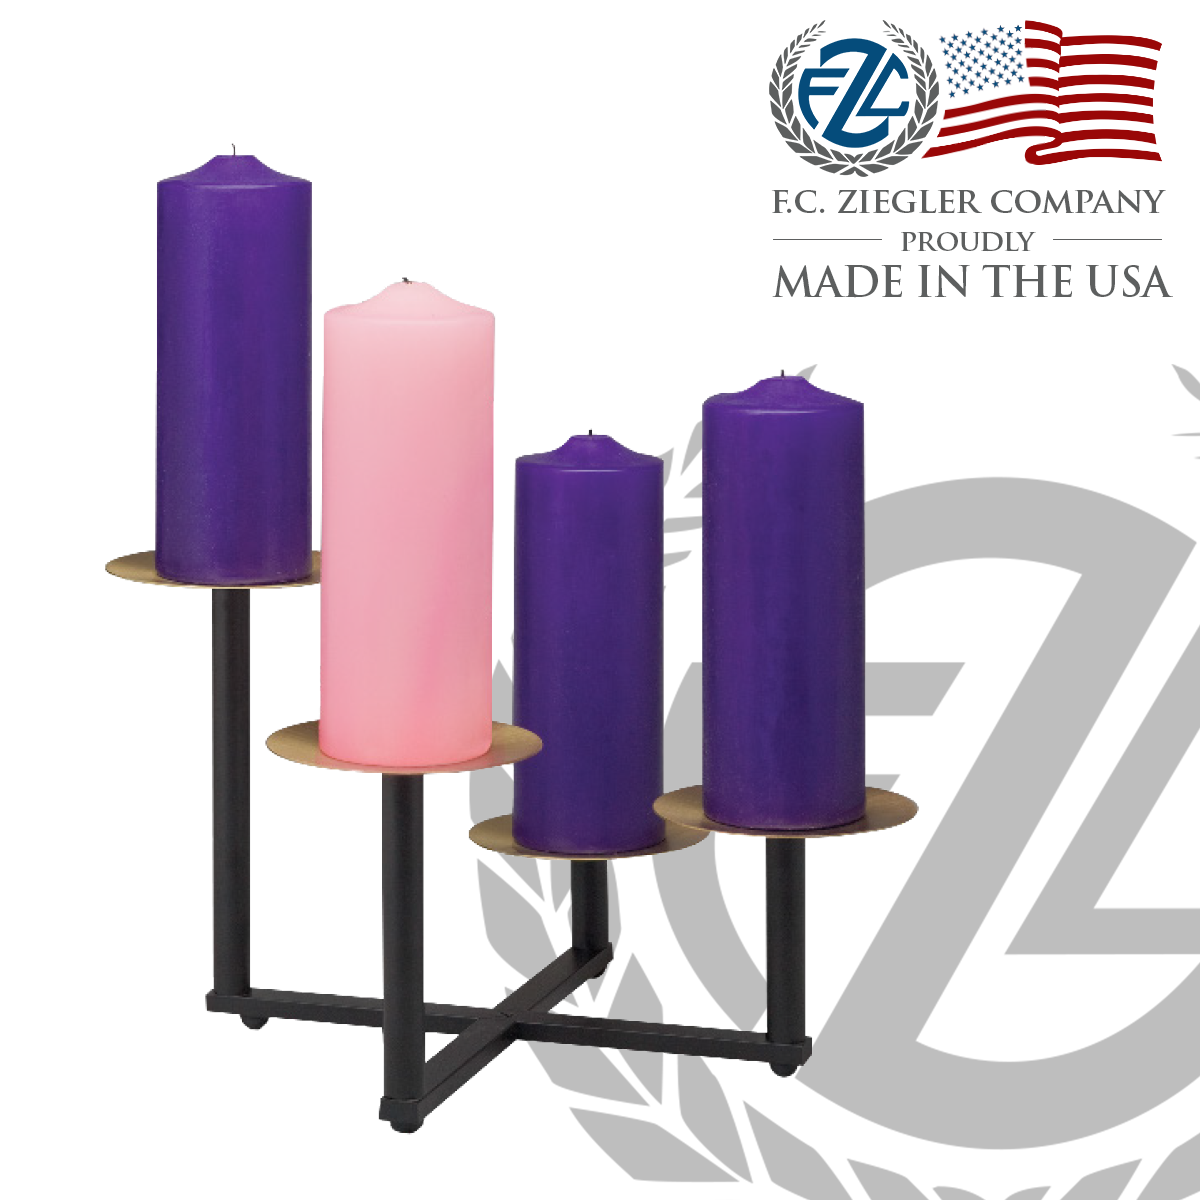 Advent Wreath (Candles sold separately)